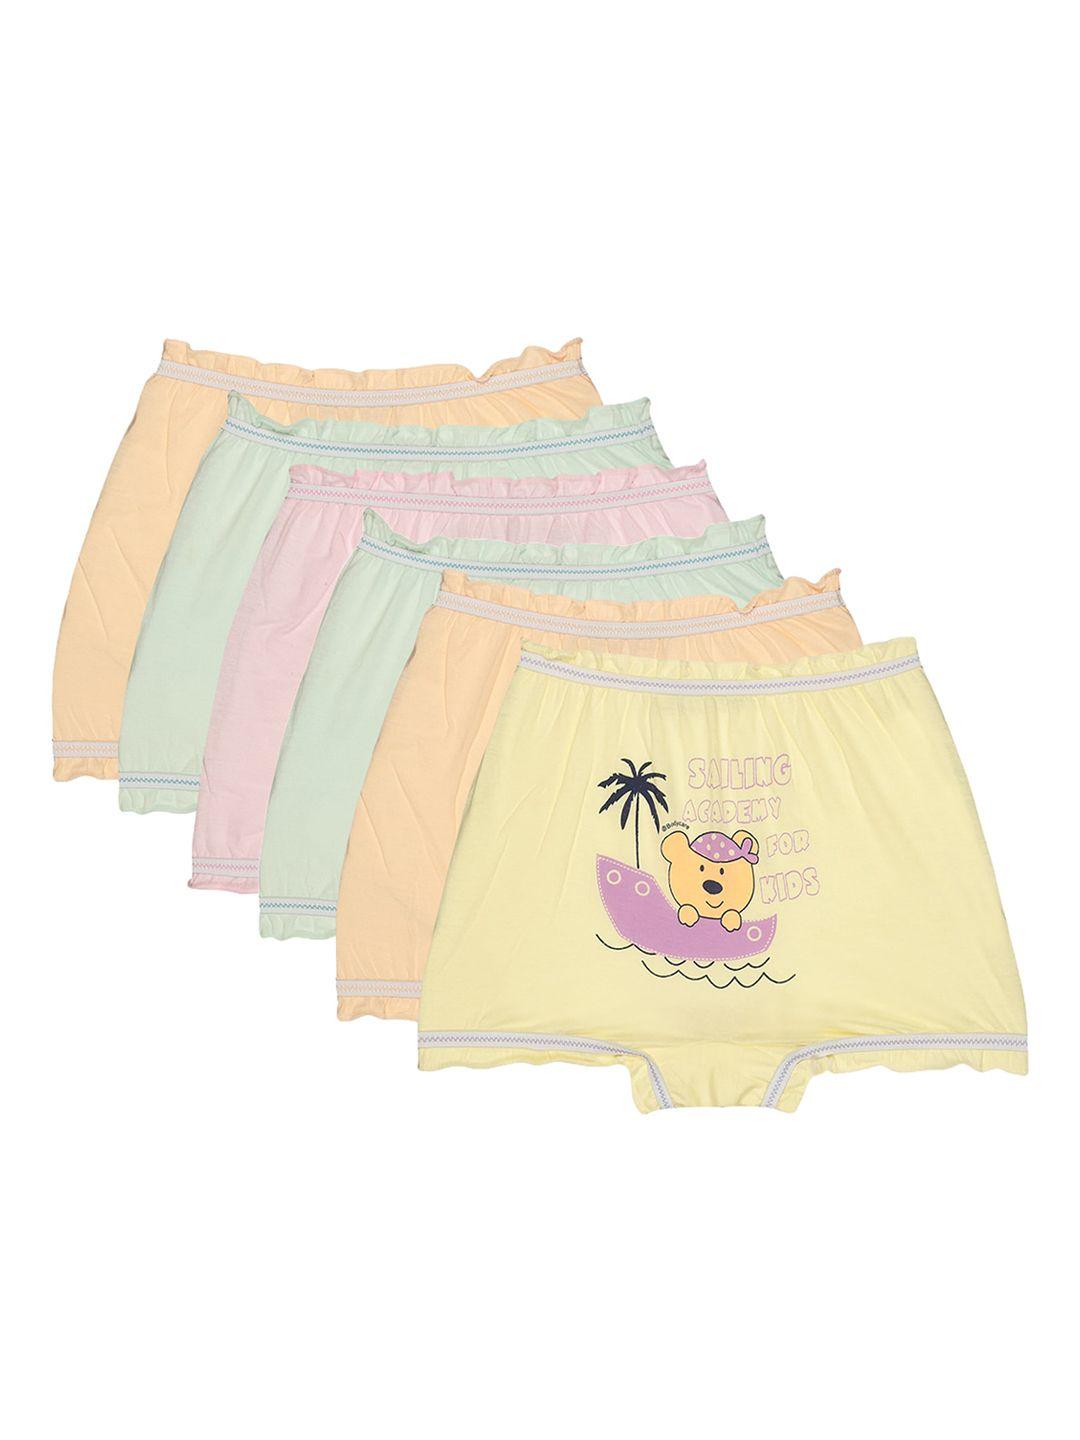 dyca kids pack of 6 assorted printed cotton boxer style briefs dia705-pk002_p6